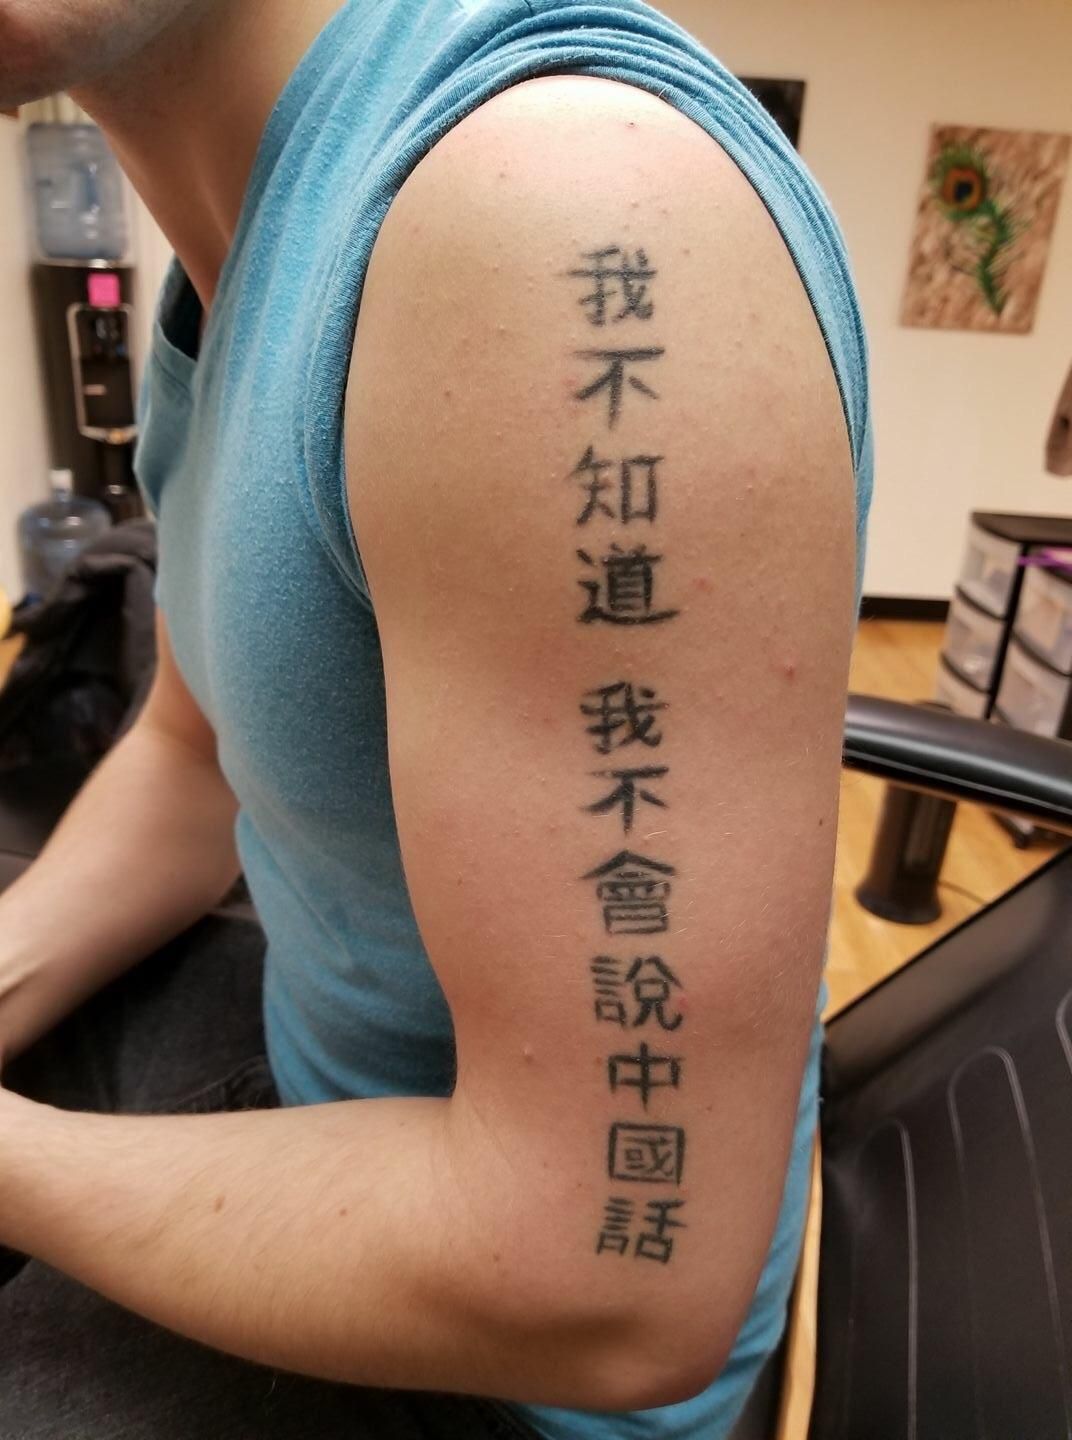 My friend's tattoo. When asked "what does that mean?" He replies, "I don't know, I don't speak Chinese." That is literally what it means.